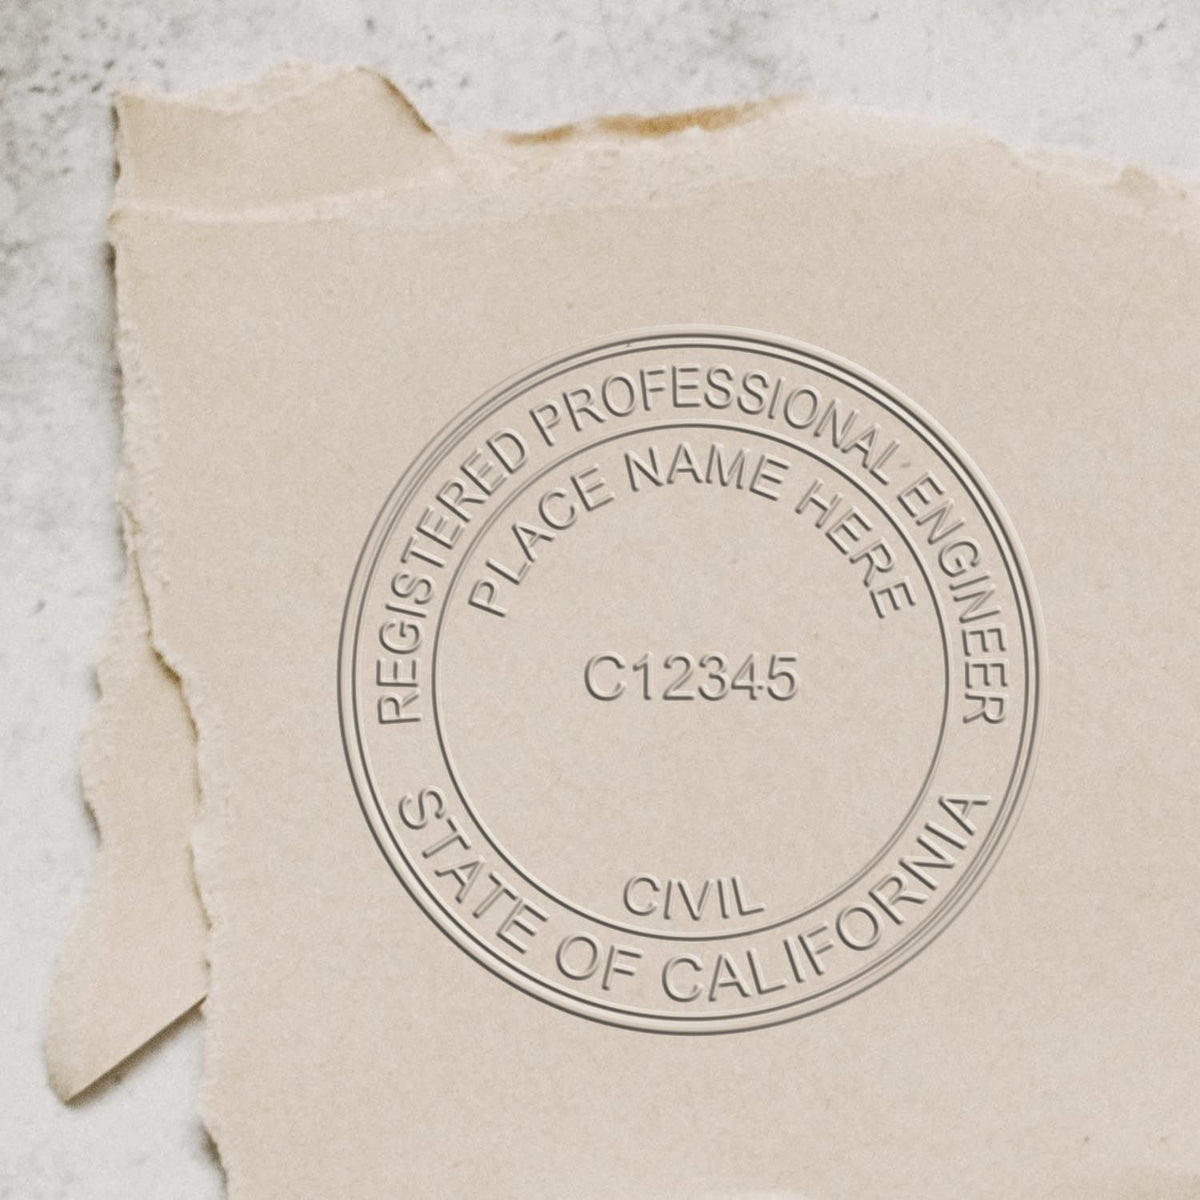 A photograph of the Long Reach California PE Seal stamp impression reveals a vivid, professional image of the on paper.